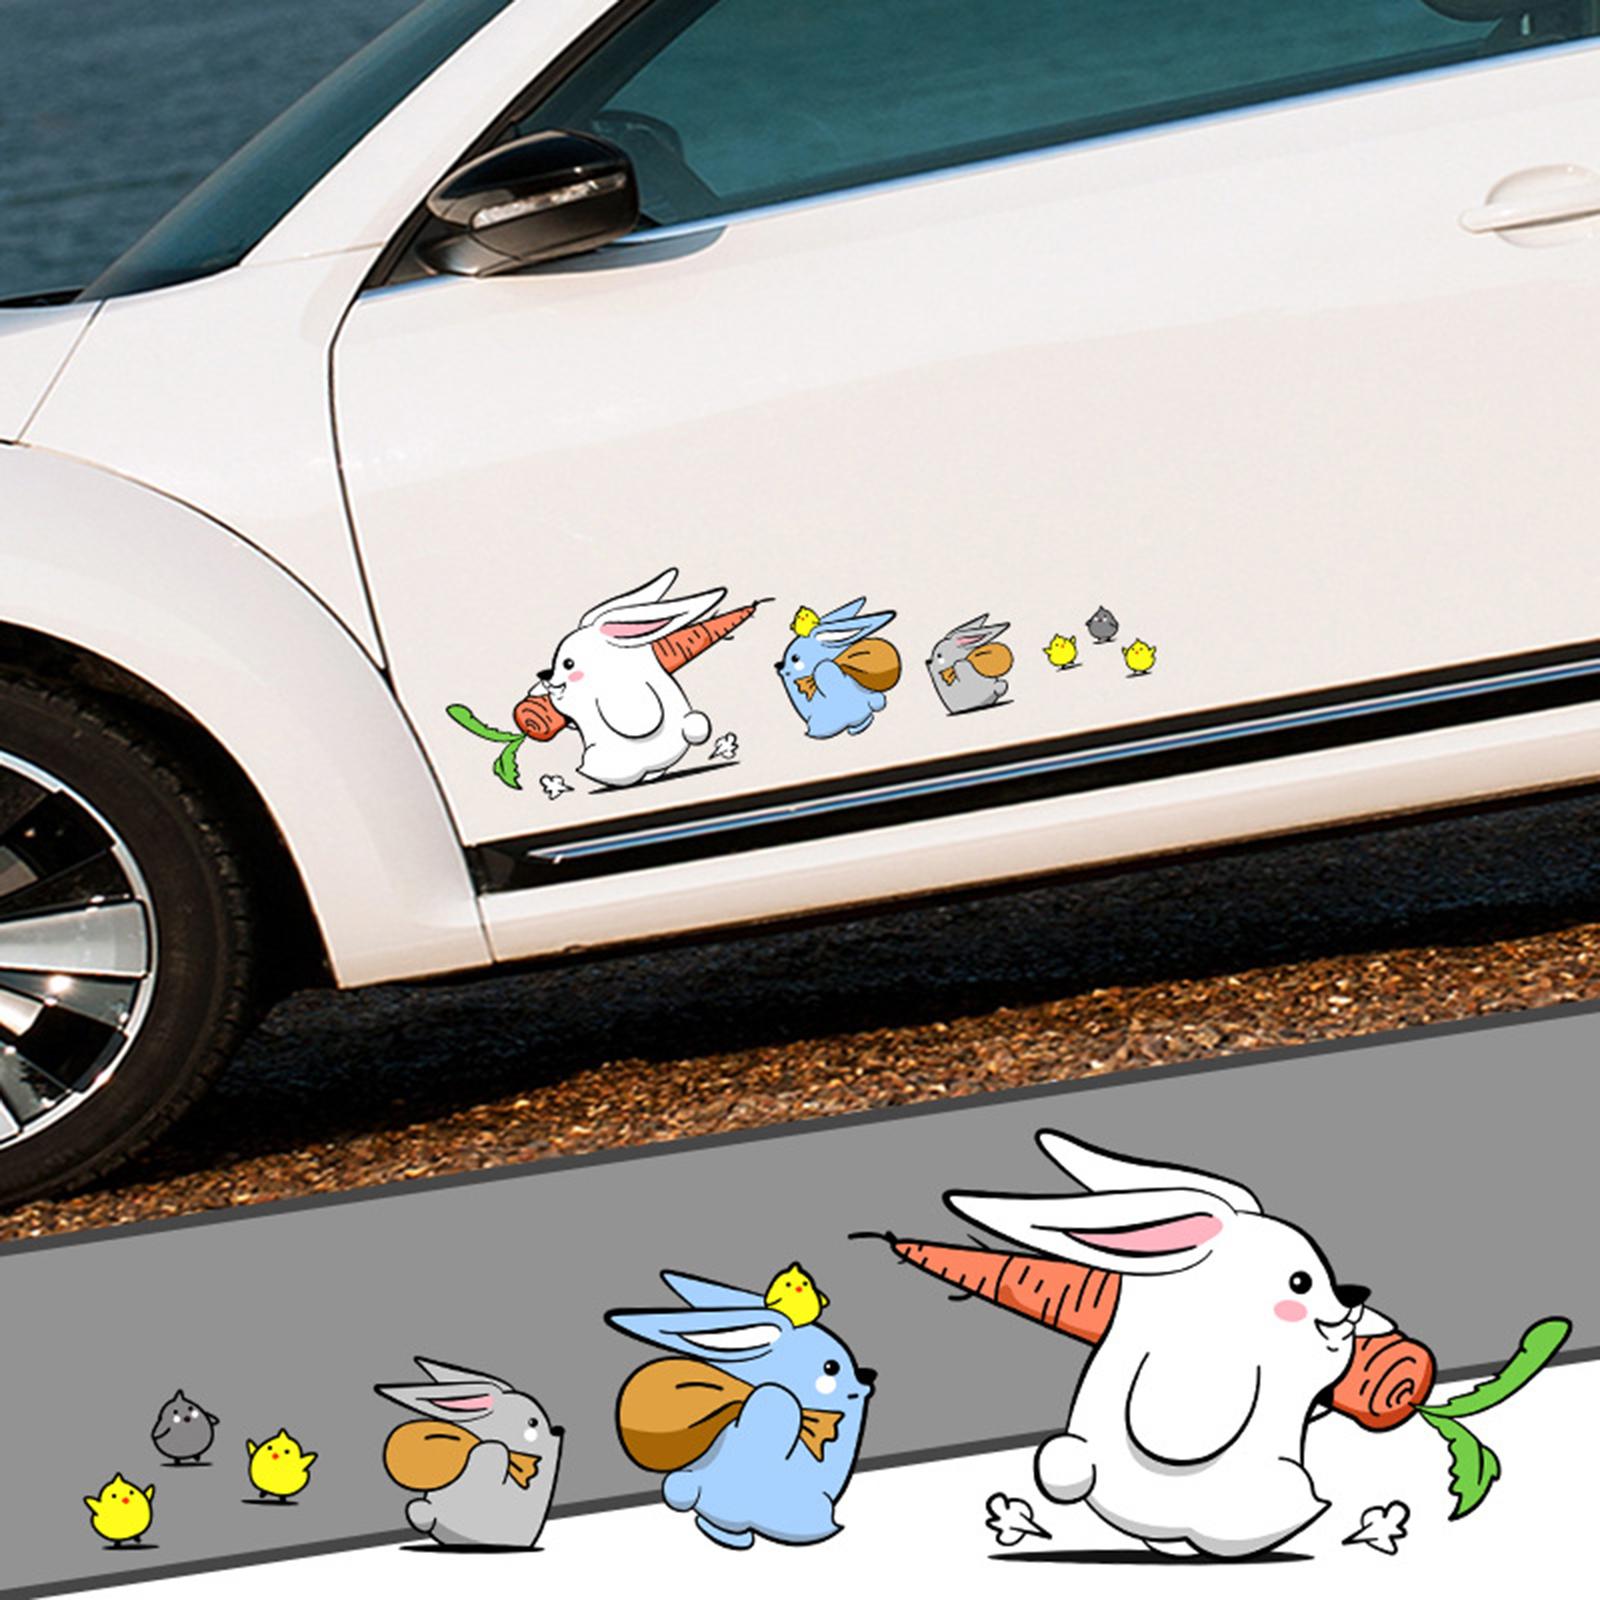 Bunny Car Stickers Car Window Decals Graphic for Cars Windows Vehicles 1 Pair S 